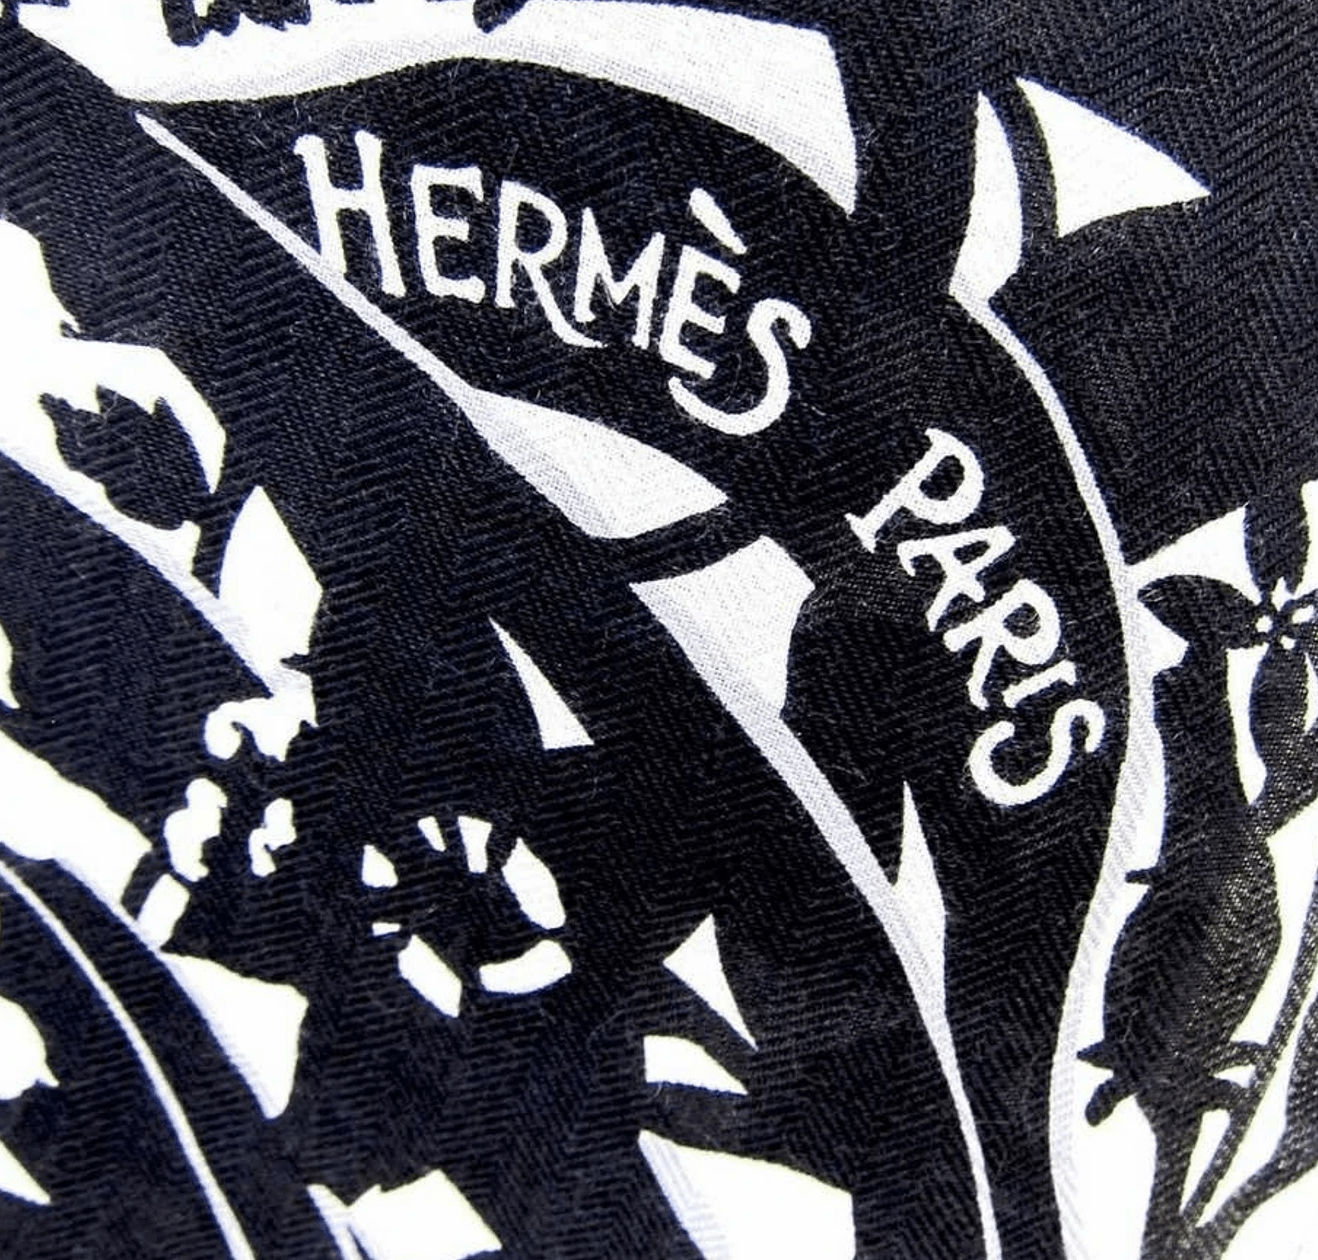 A Silk Scarf, Tyger Tyger, Hermes (Lot 116 - Upcoming: The Important Spring  Auction, Saturday, March 14thMar 14, 2020, 10:00am)